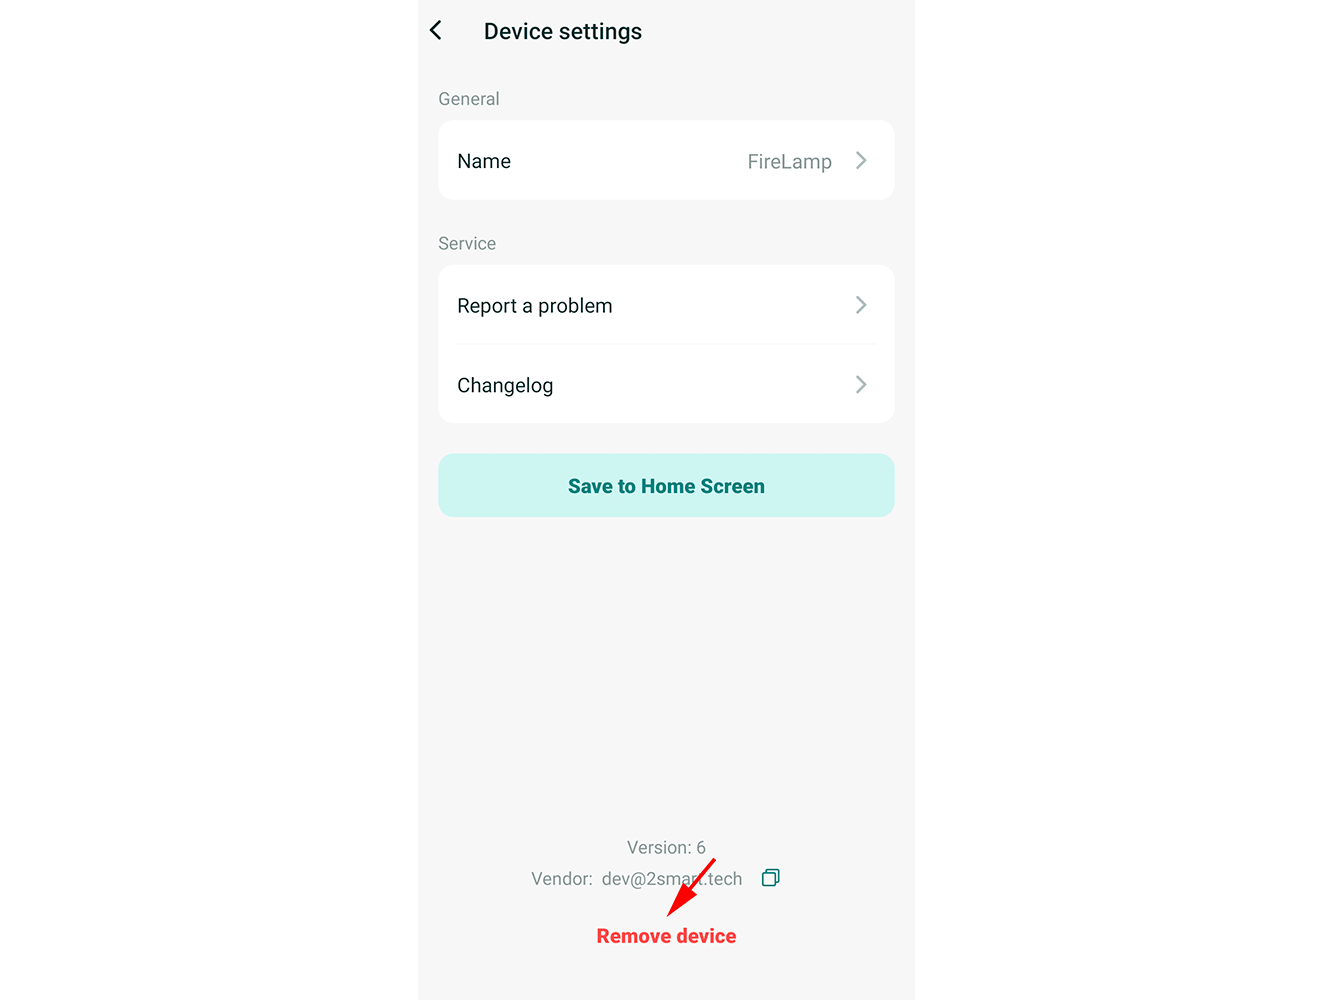 Removing a device from the mobile app